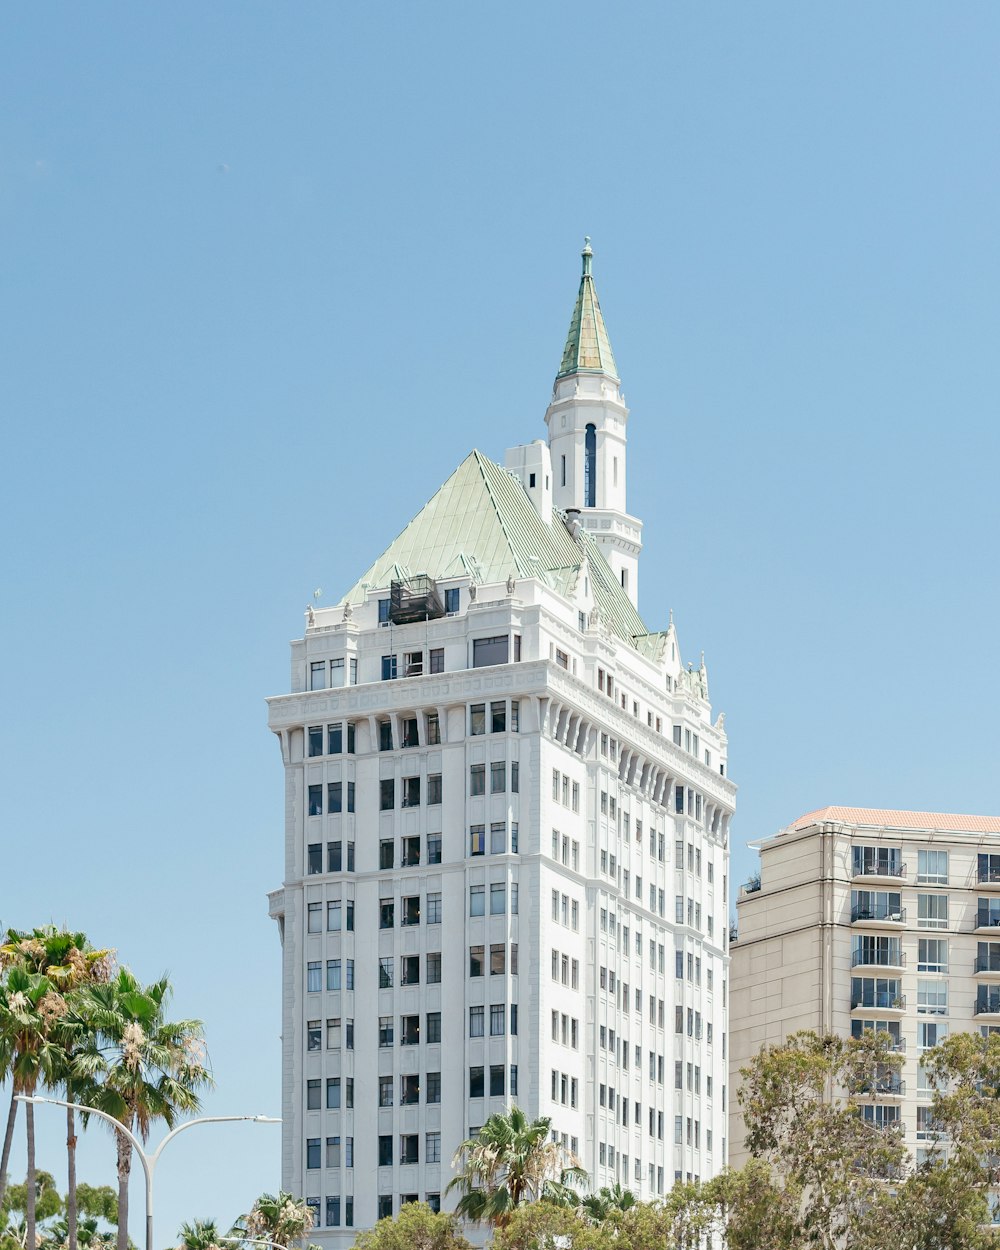 a tall white building with a steeple on top